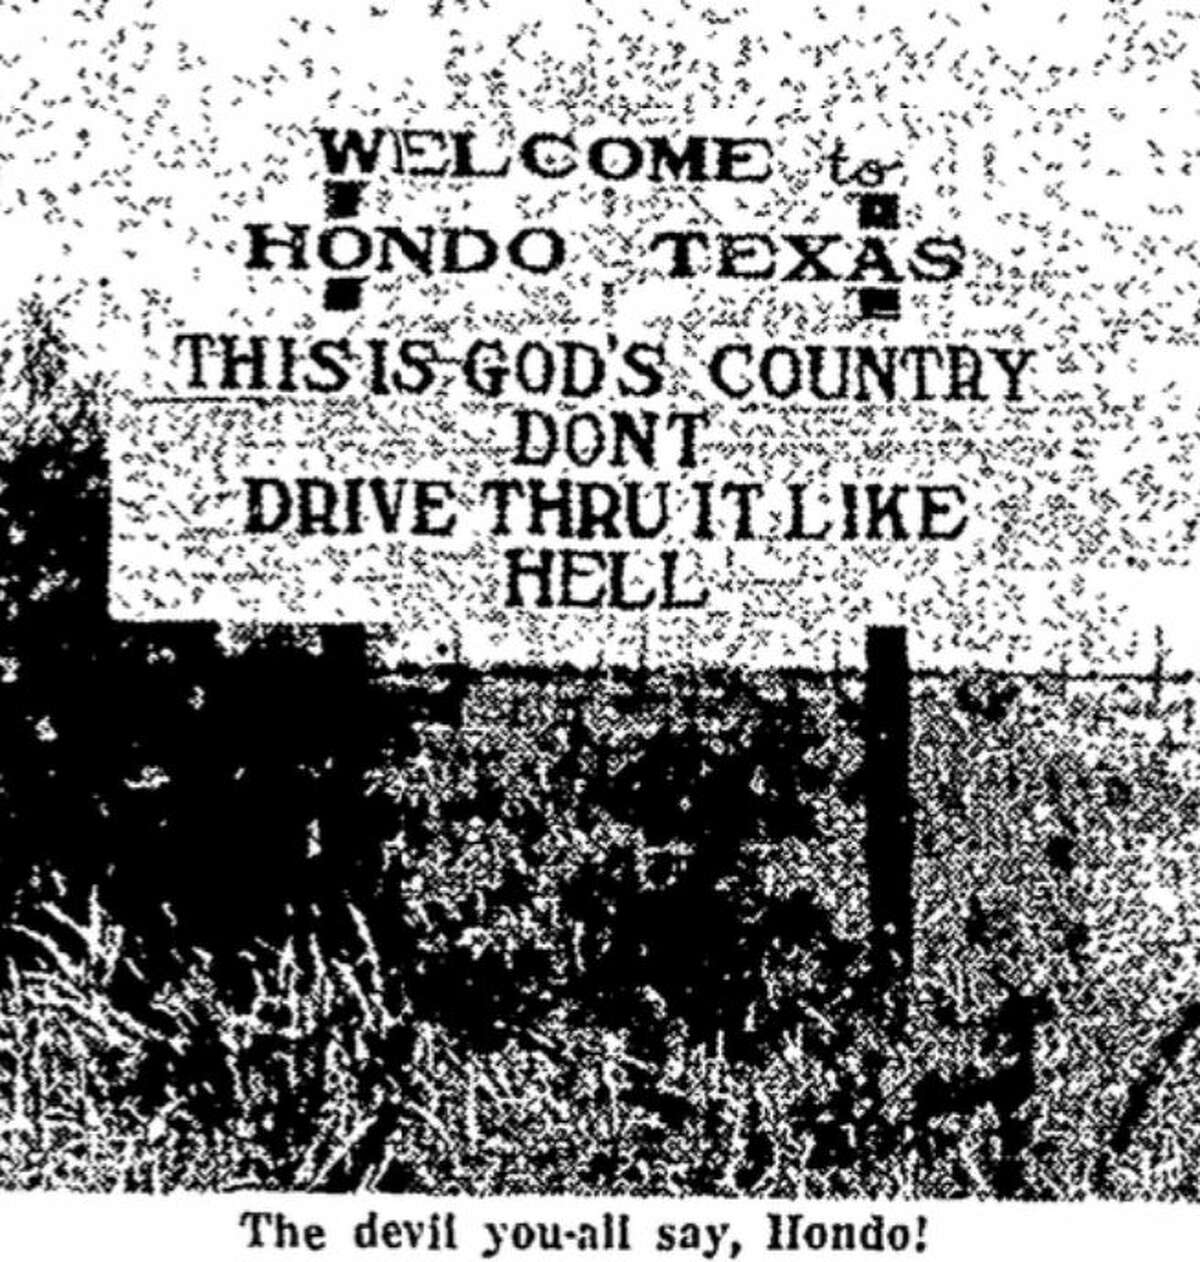 Some images of signs that accompanied Sig Byrd's original column in 1958. Images were originally provided by the Texas highway department.